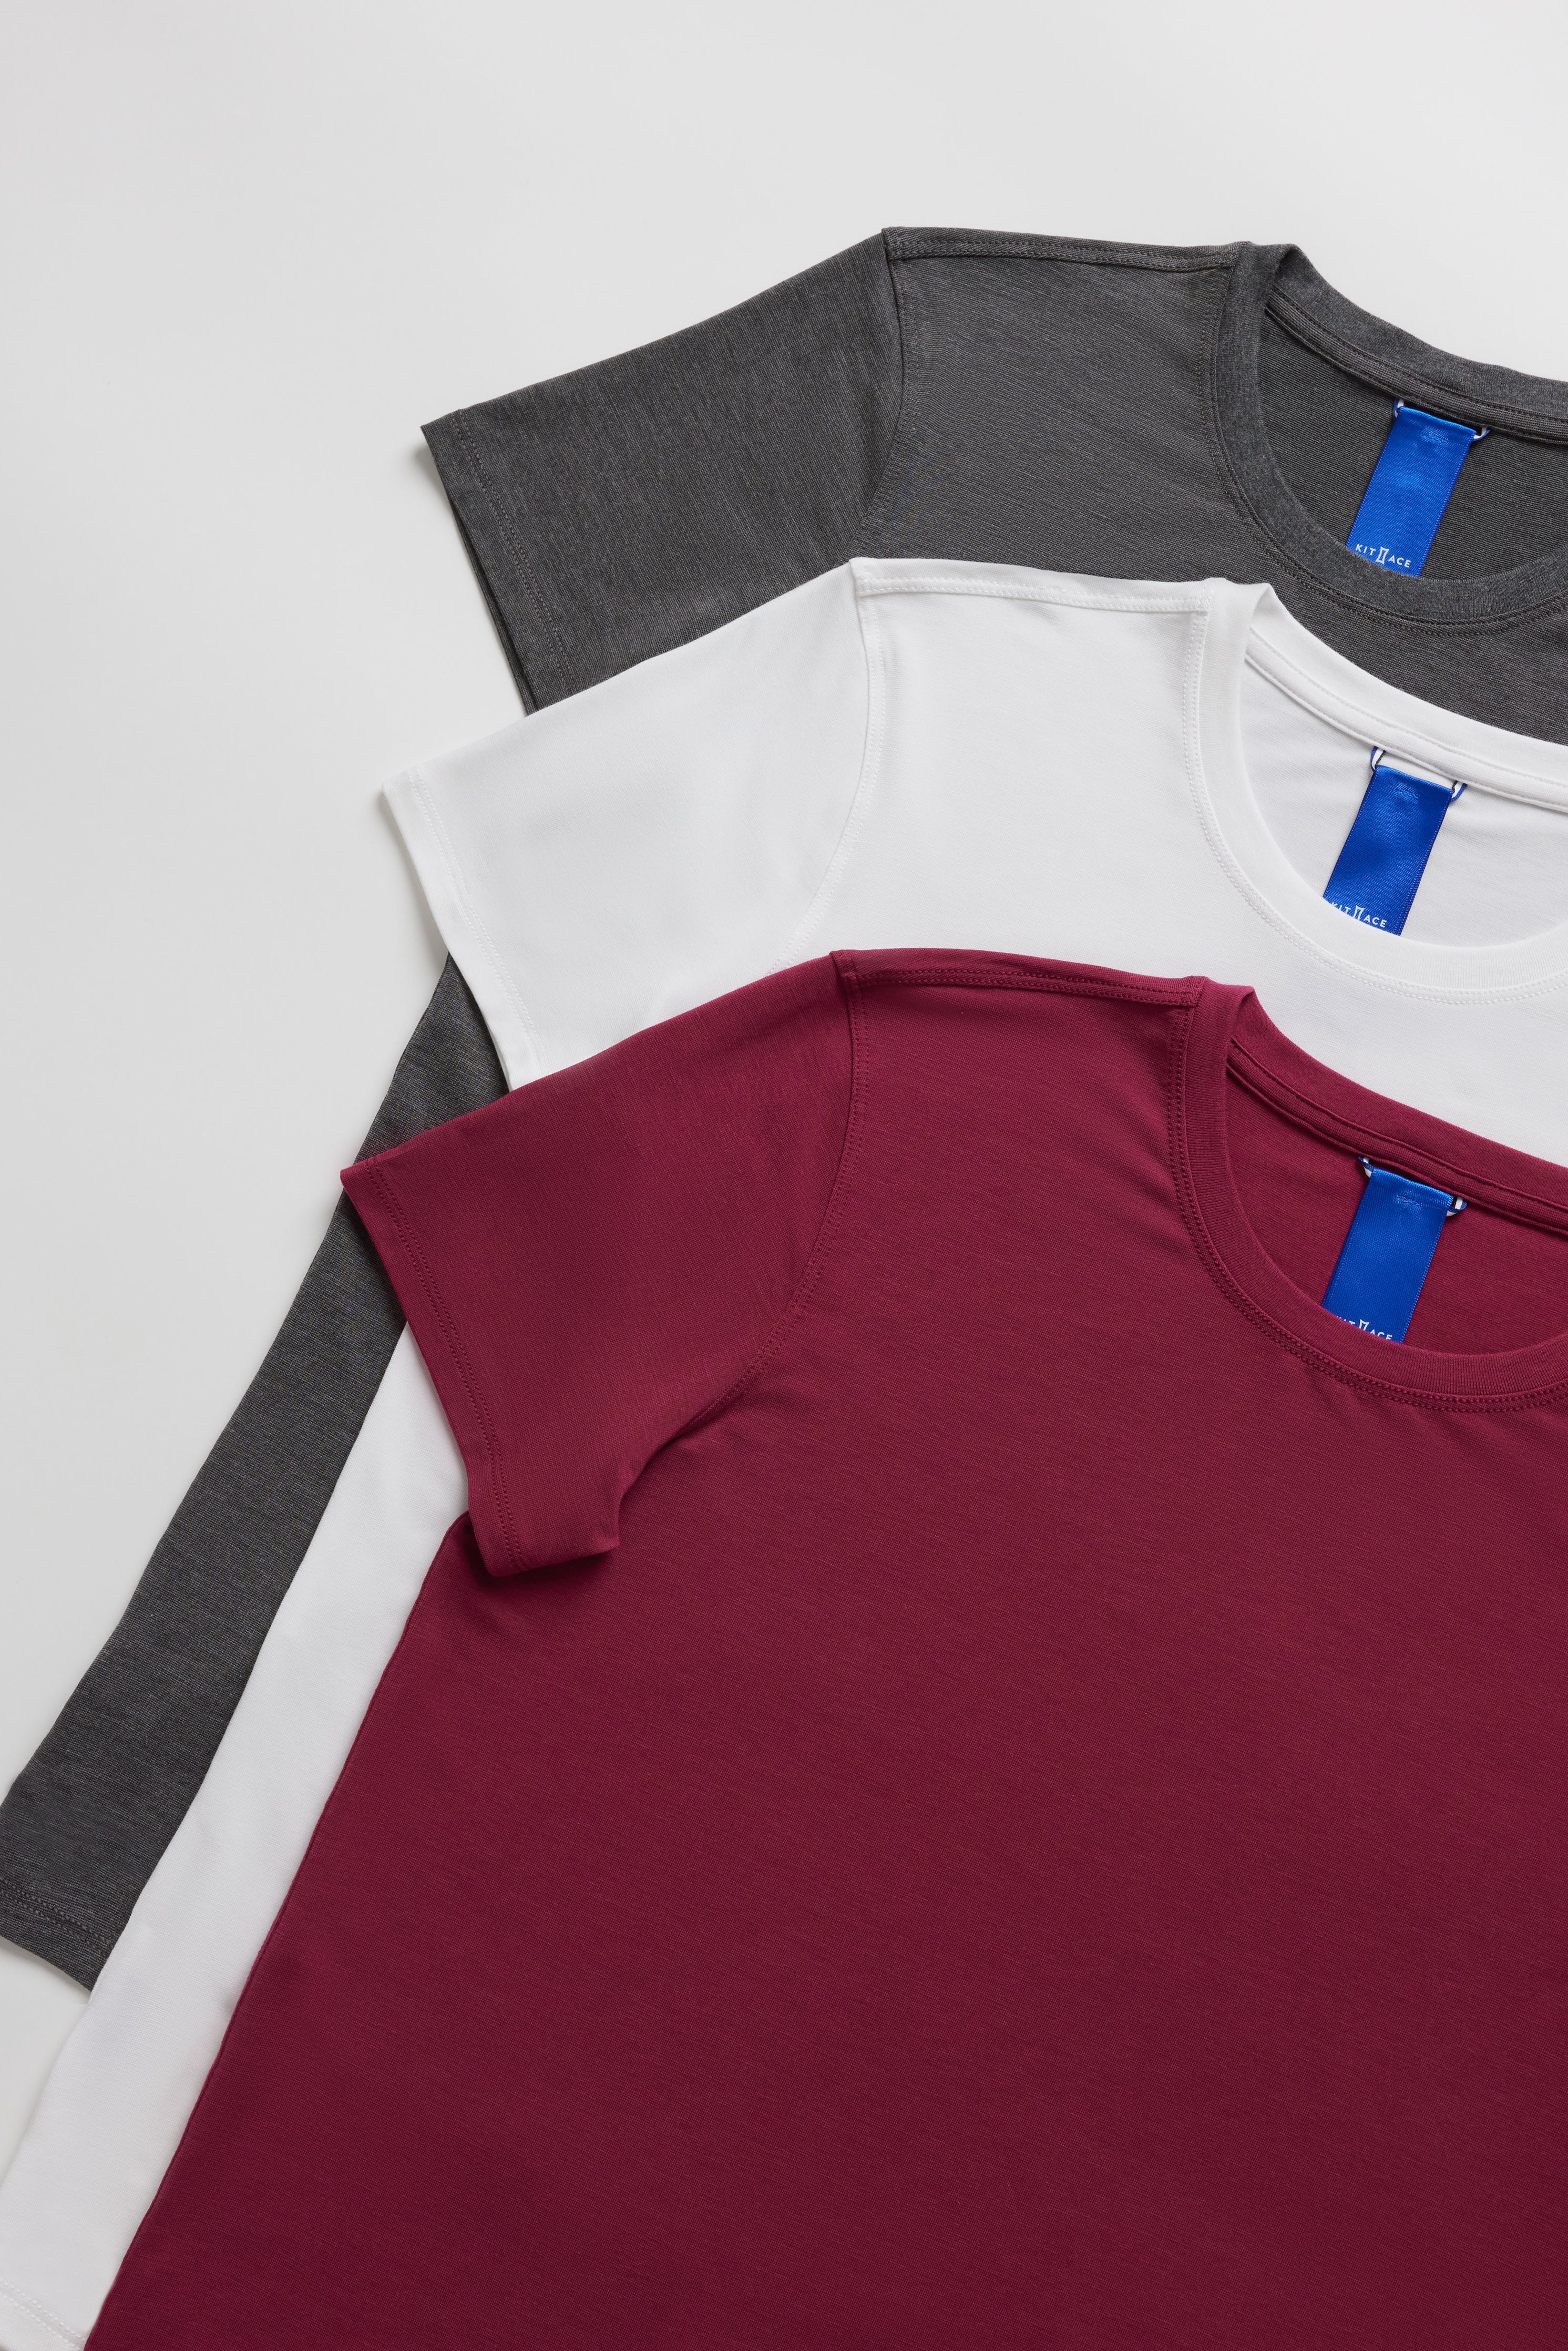 Kit and Ace — Kit Crew 3 Pack Tees